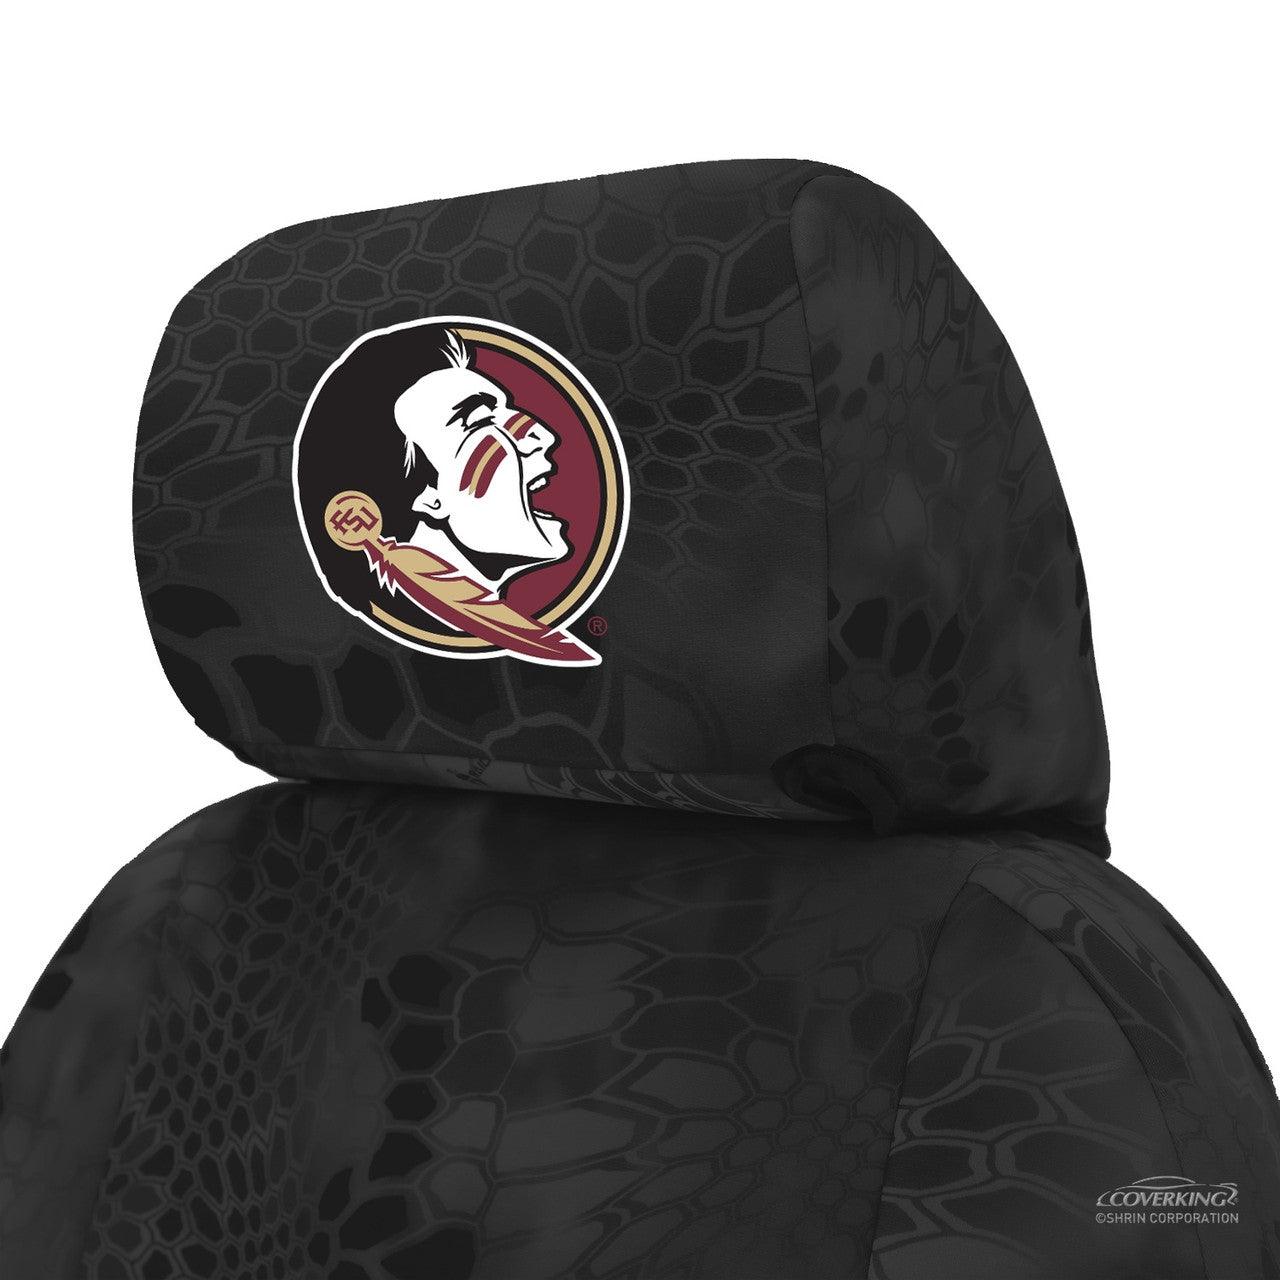 redskins seat covers